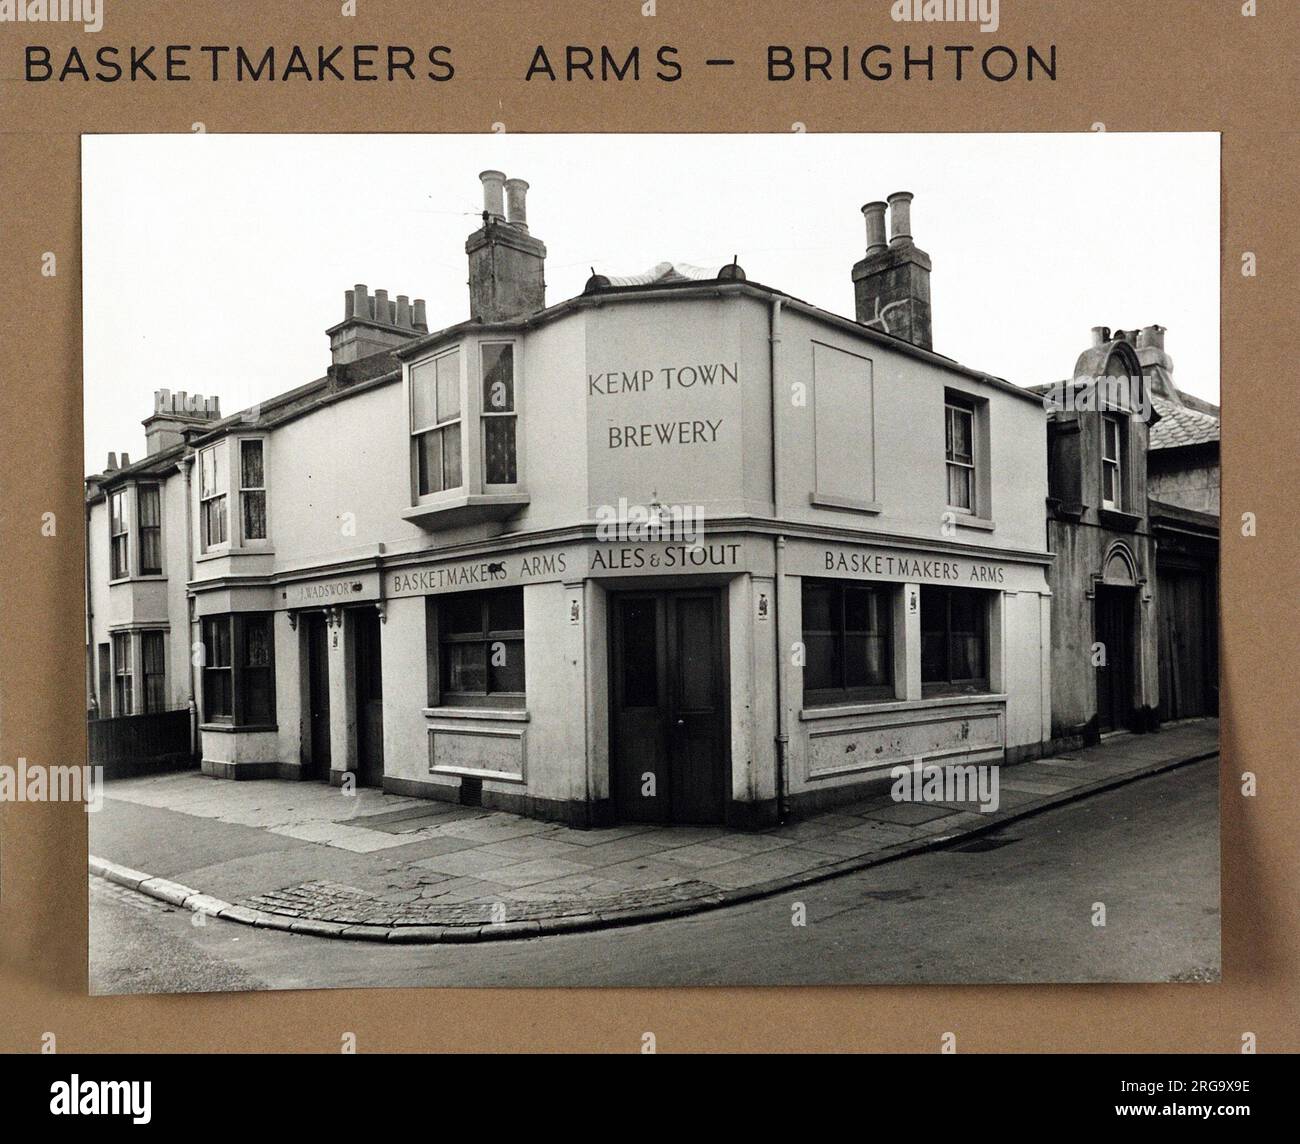 Photograph of Basketmakers Arms, Brighton, Sussex. The main side of the print (shown here) depicts: Corner on view of the pub.  The back of the print (available on request) details:  Nothing for the Basketmakers Arms, Brighton, Sussex BN1 4AD. As of July 2018 . Fullers pub Stock Photo